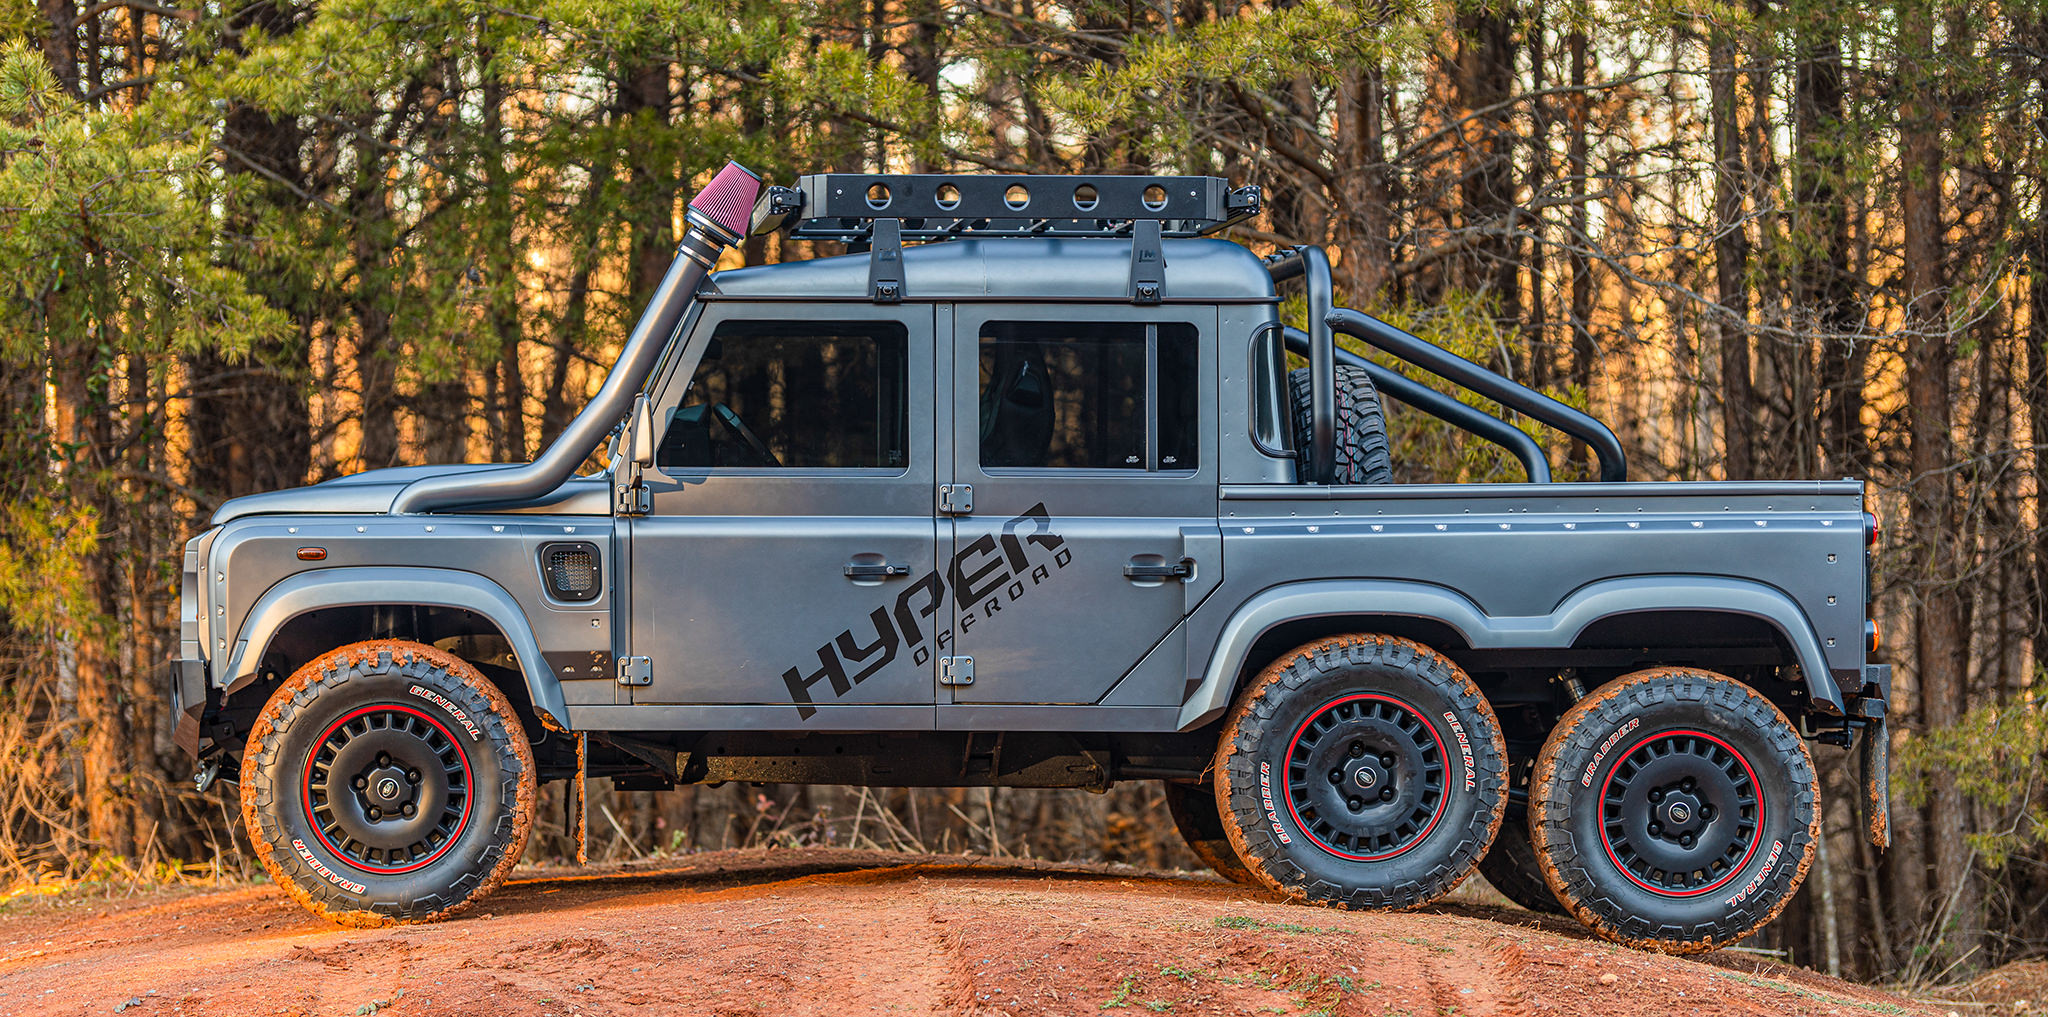 Modified & Custom Built Land Rover Defender - The landrovers